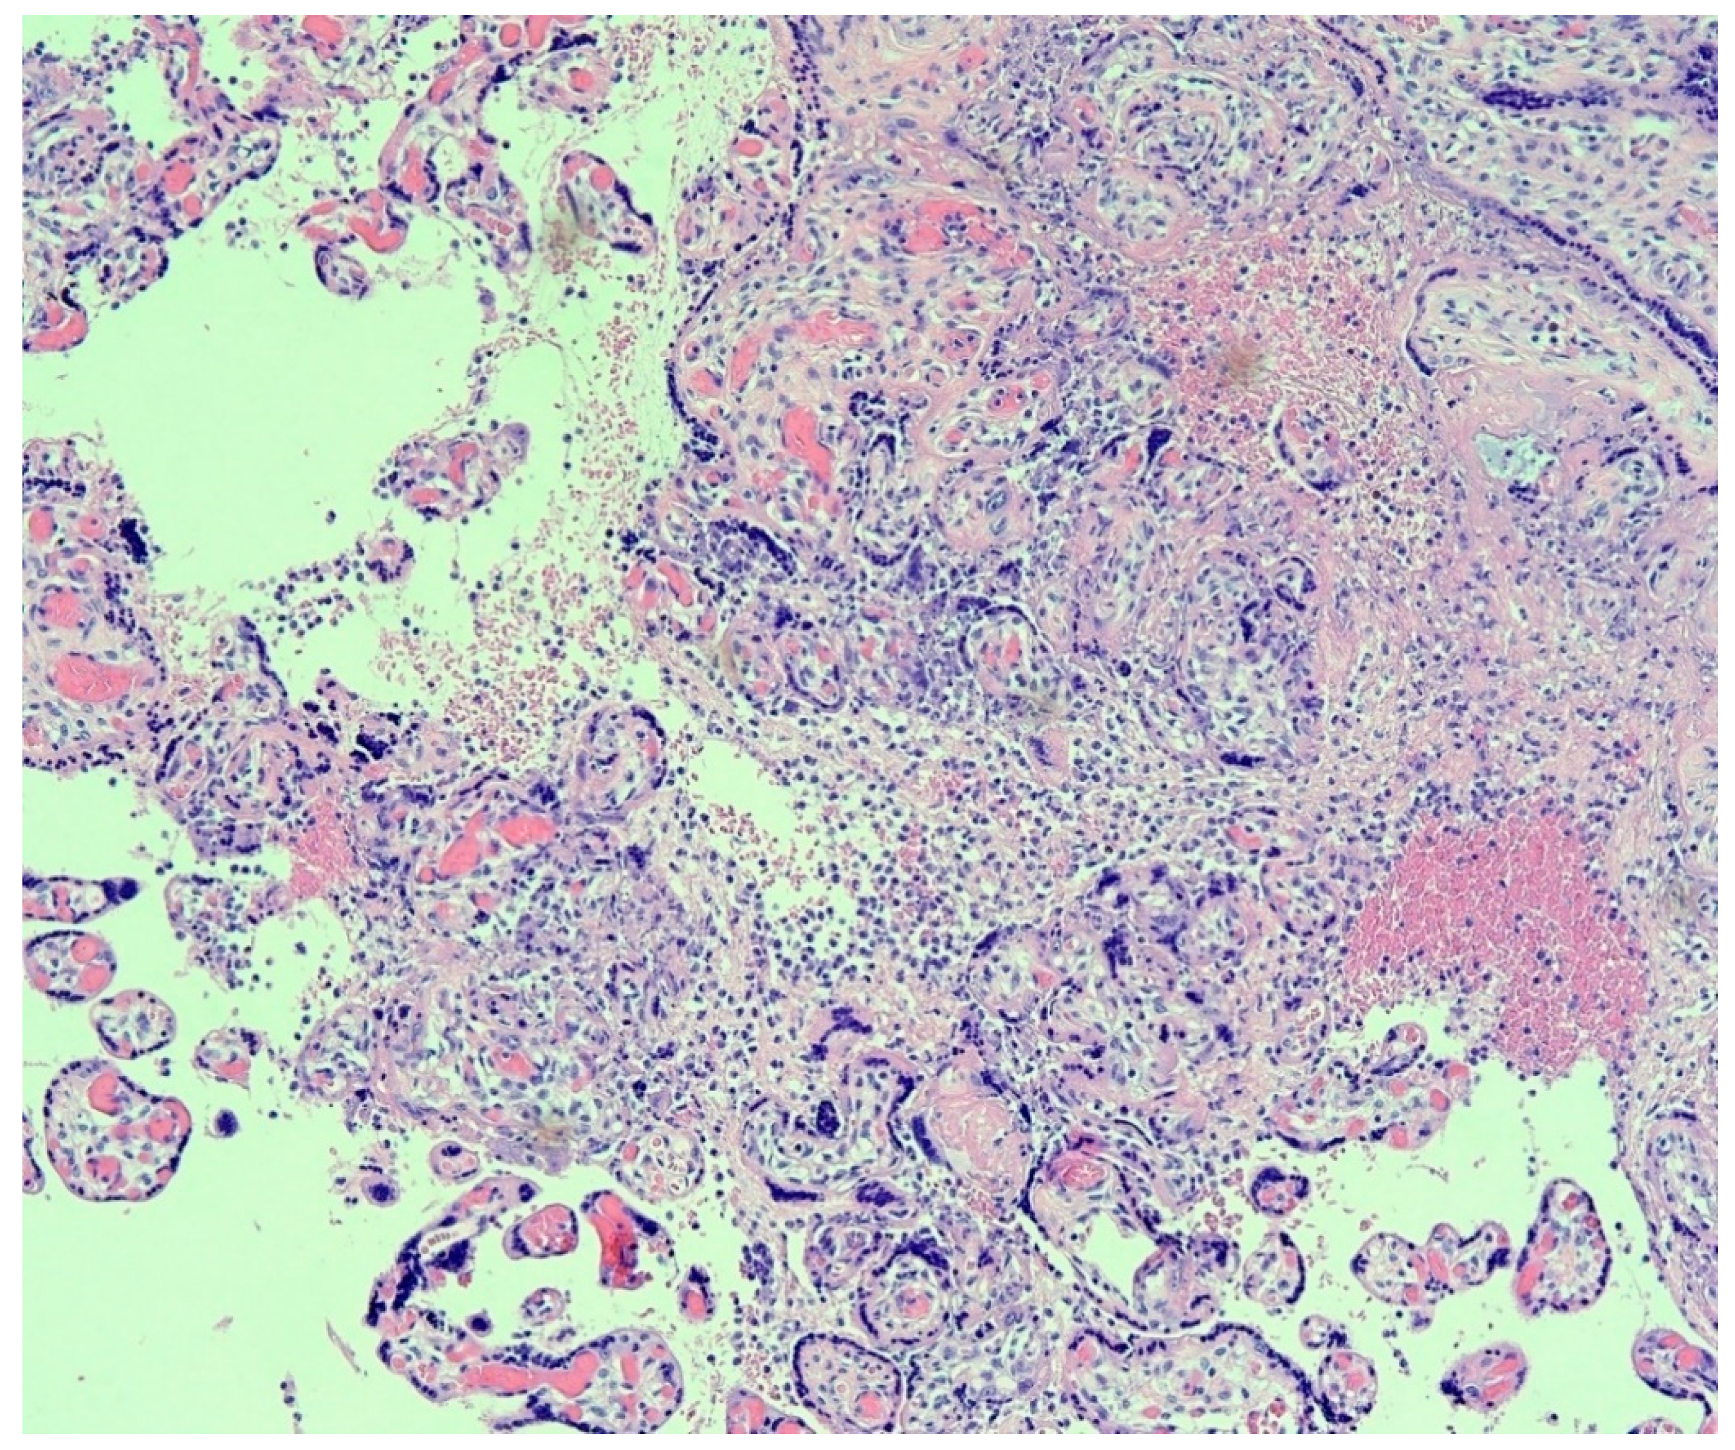 Viruses | Free Full-Text | Placental Pathology of COVID-19 with and without  Fetal and Neonatal Infection: Trophoblast Necrosis and Chronic Histiocytic  Intervillositis as Risk Factors for Transplacental Transmission of  SARS-CoV-2